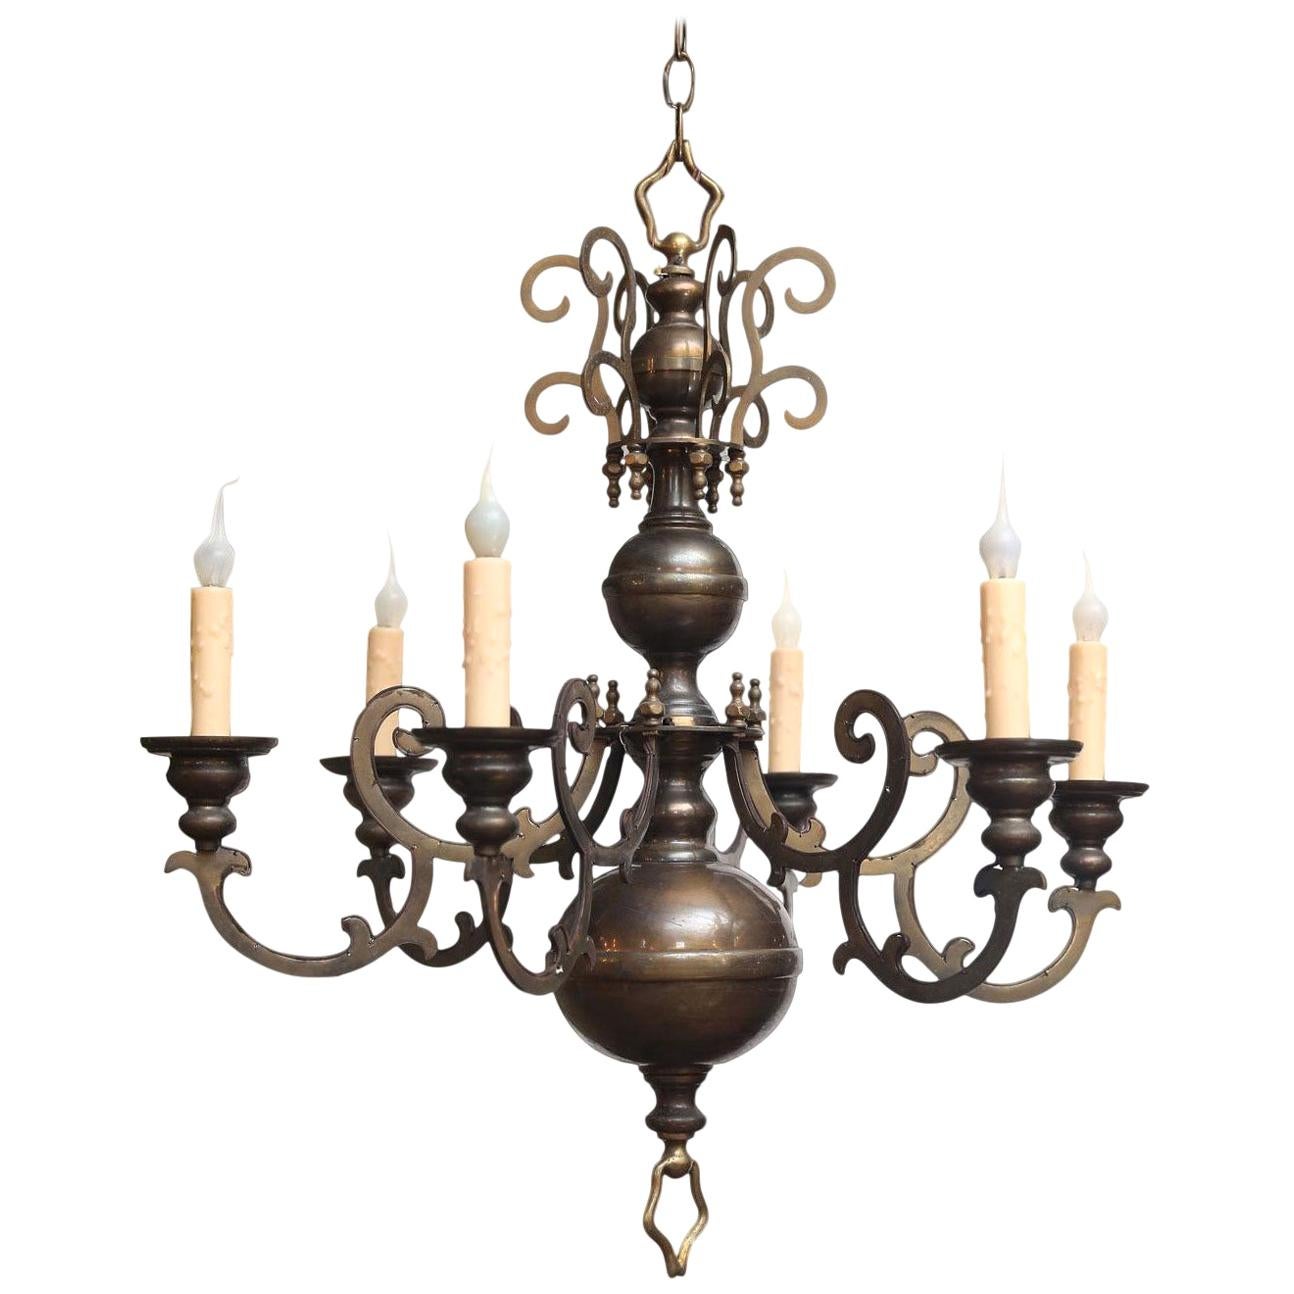 Antique Bronze Georgian-Style Chandelier with Flat Arms and Beautiful Patina